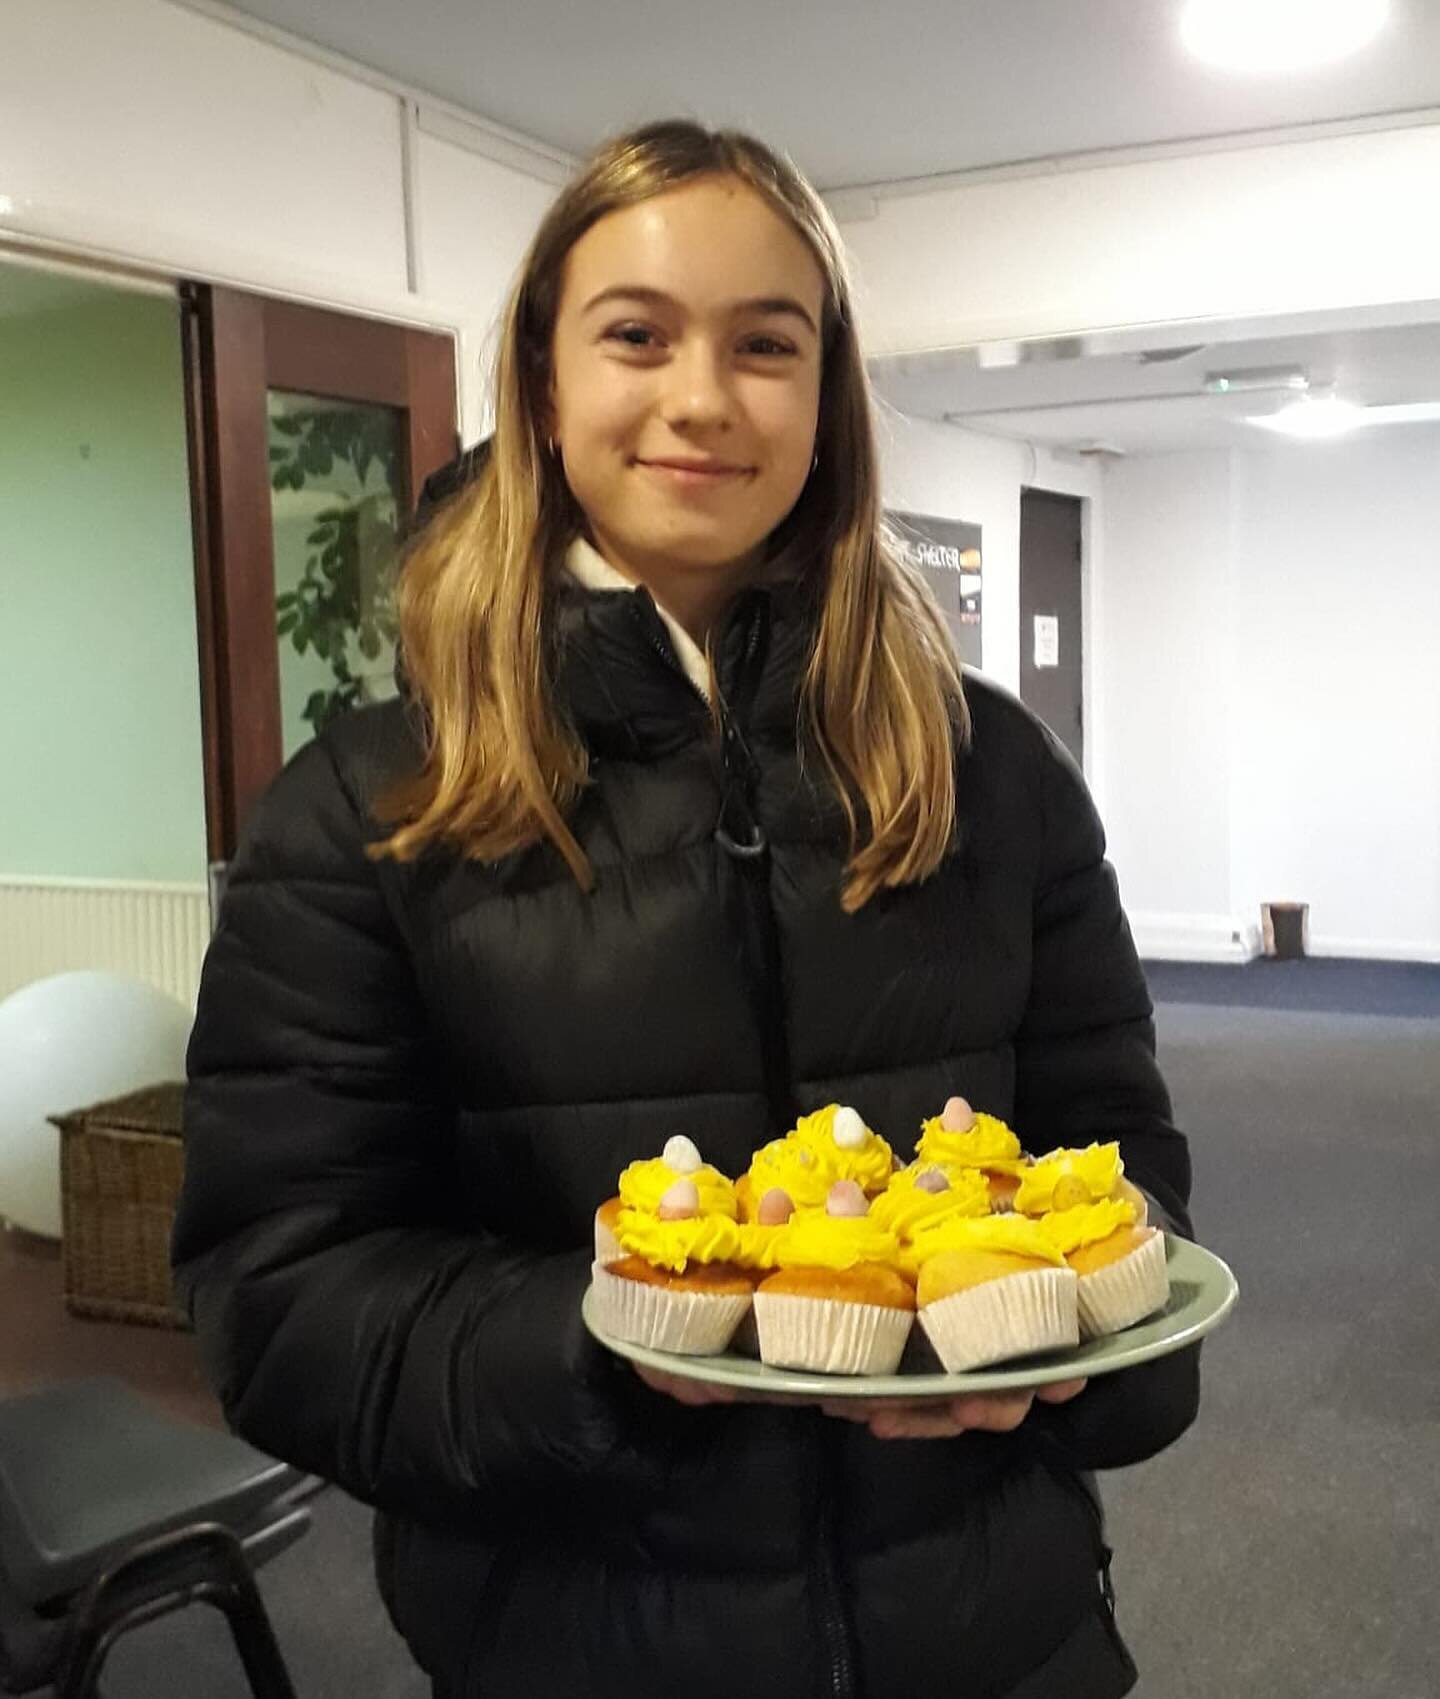 Happy Easter! 🐣🌷🐰🌸

To celebrate we had some fabulous cupcakes baked by Cecily, one of our amazing Duke of Edinburgh volunteers, and yet another gorgeous dessert baked by our regular volunteer, Mary.

We also have a very generous donation of 40 E